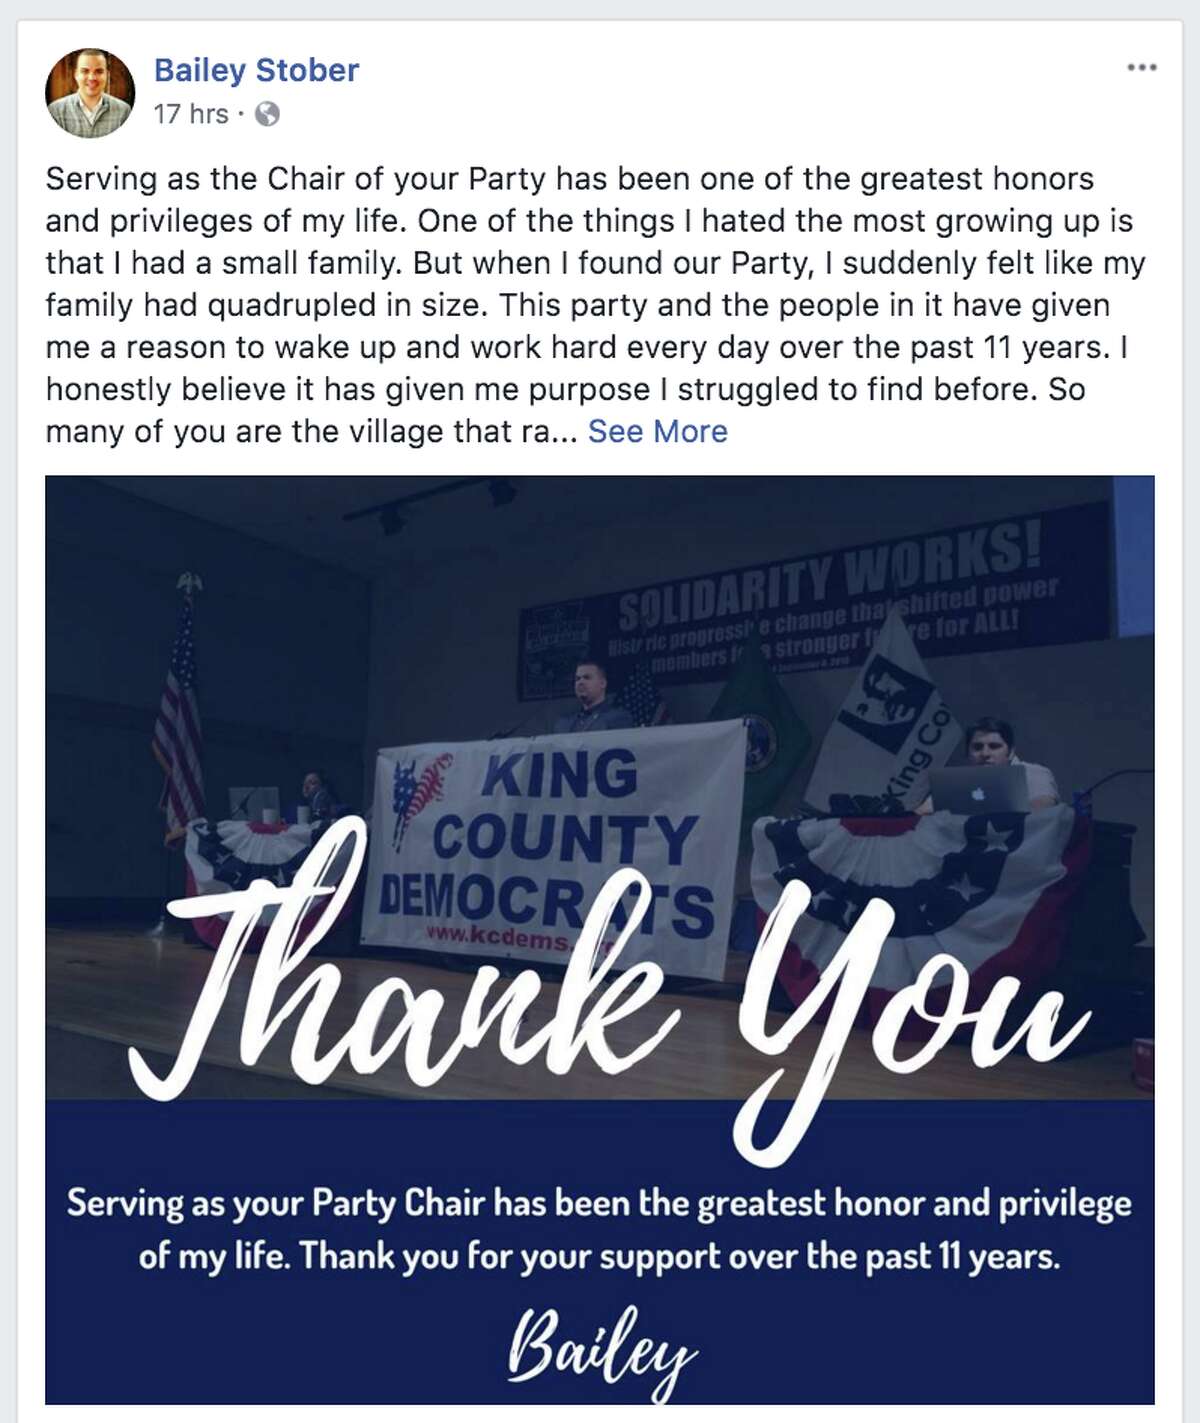 Bailey Stober wrote a lengthy Facebook post apologizing for his conduct as King County Democrats chair..